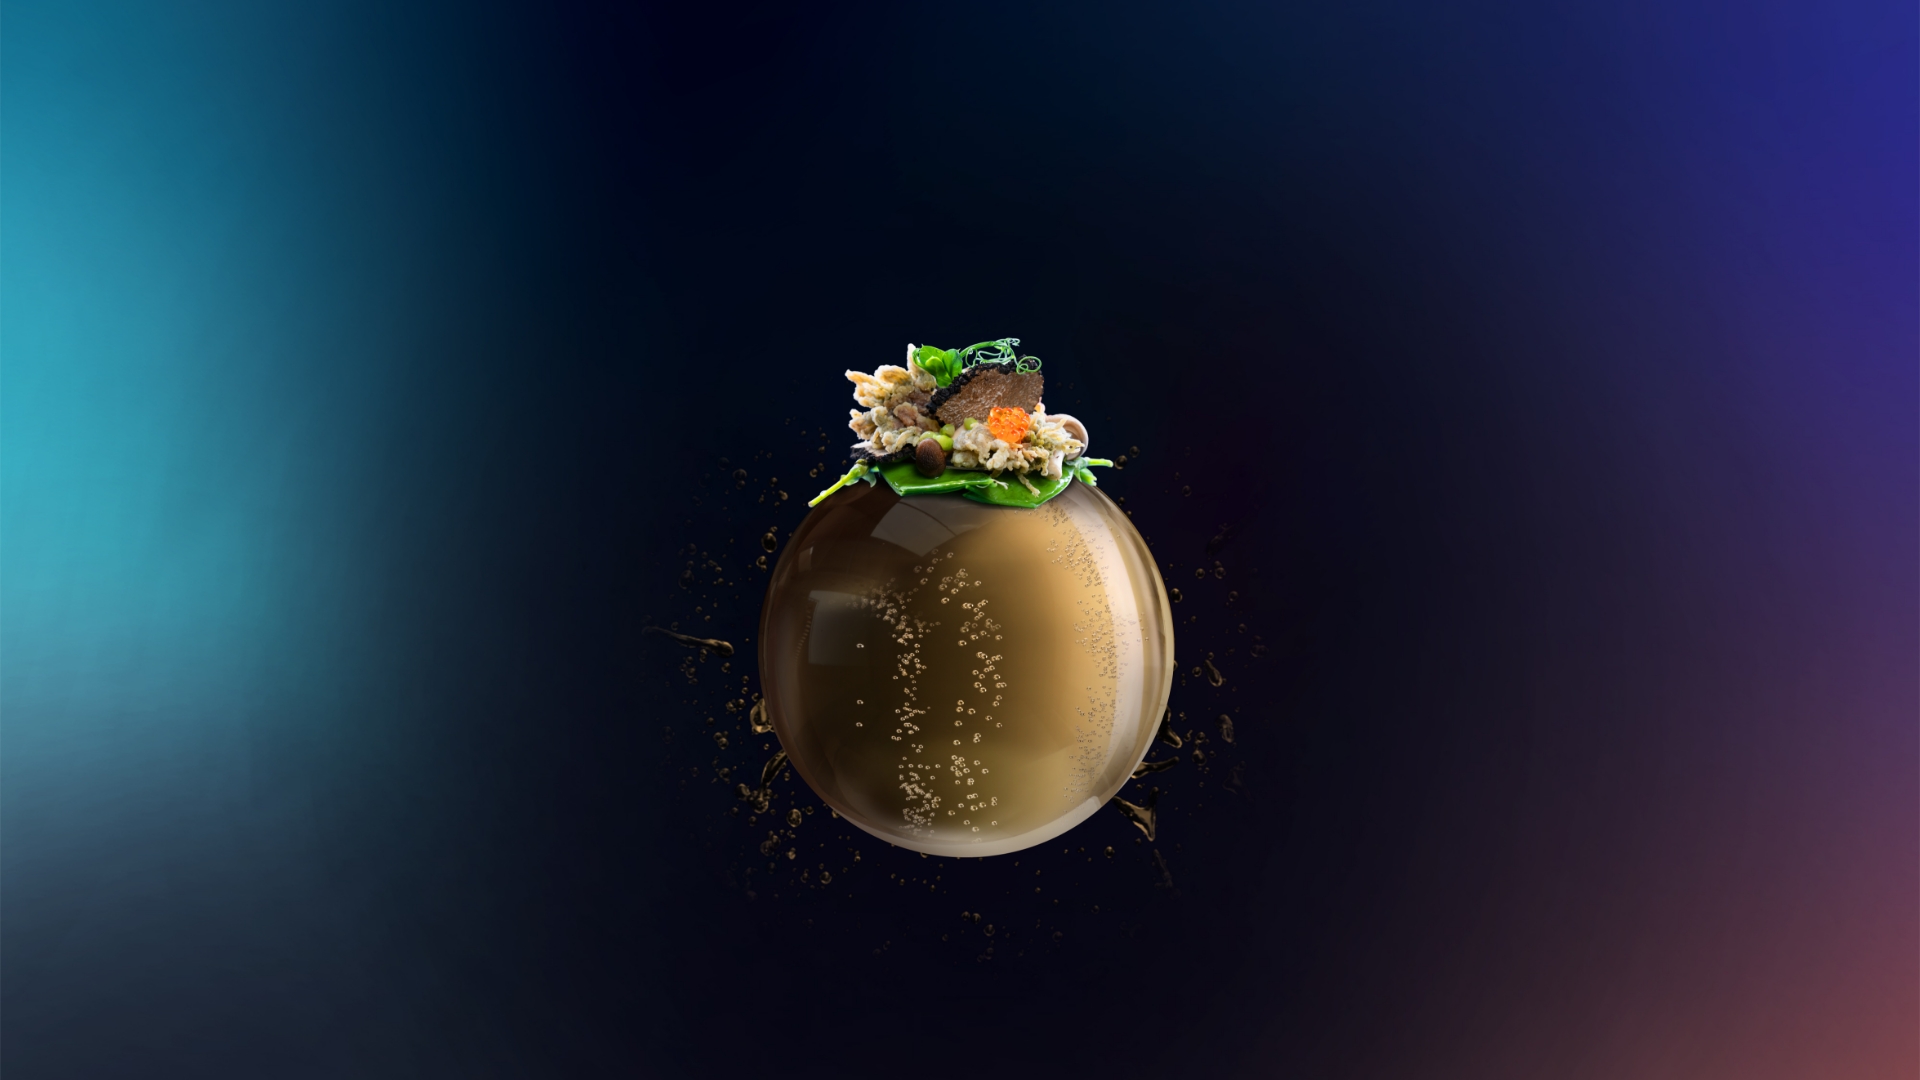 The Eatrenalin sphere 'indulgence'. The symbol of the Eatrenalin experience. 